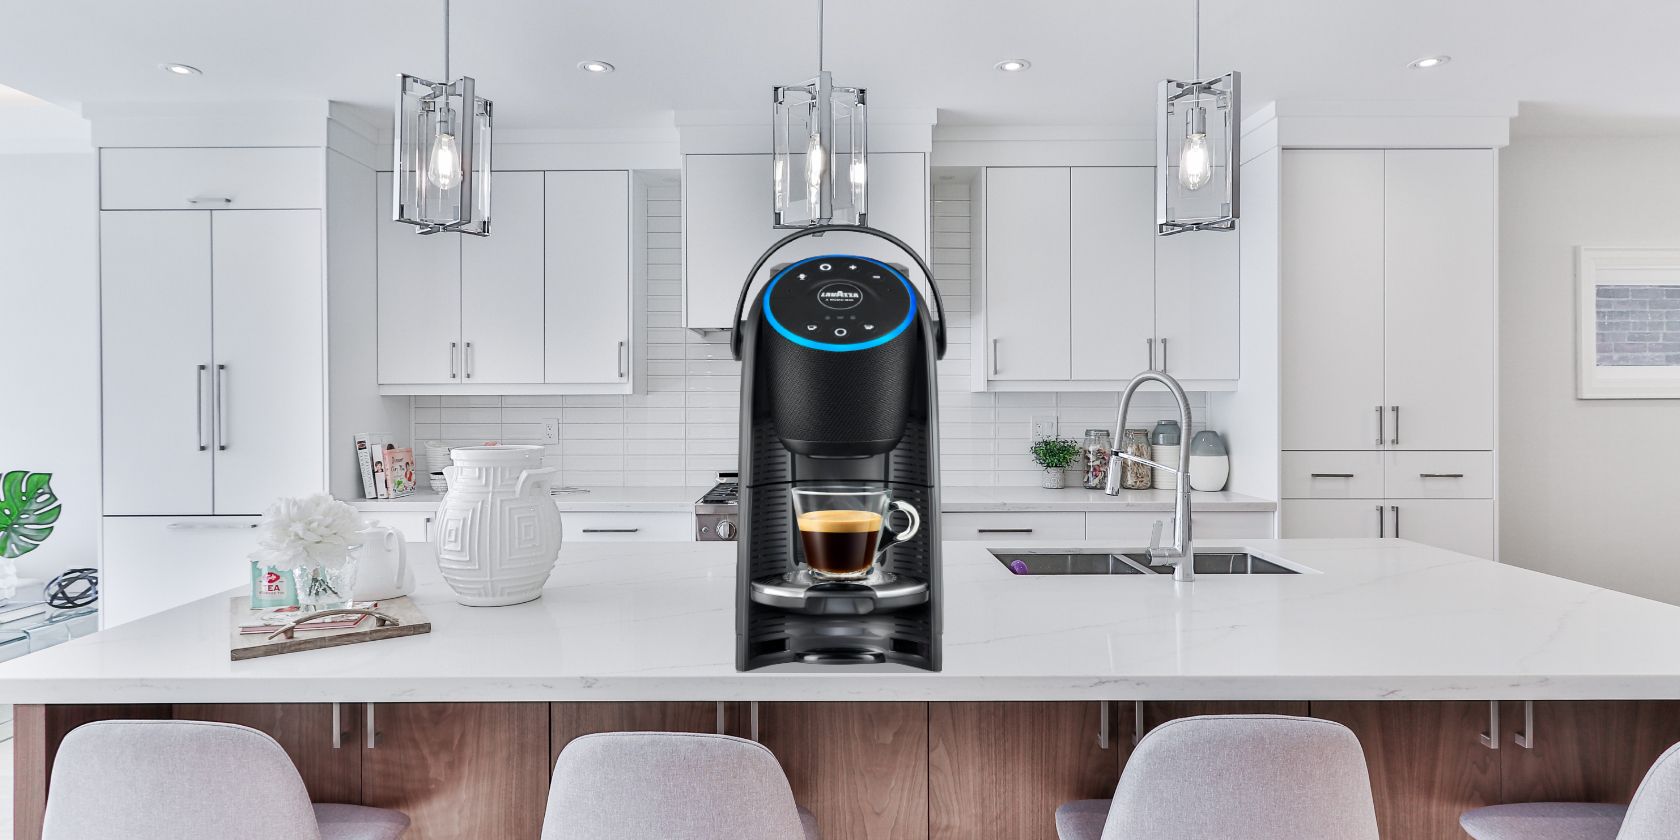 Lavazza just launched the first coffee machine with built in